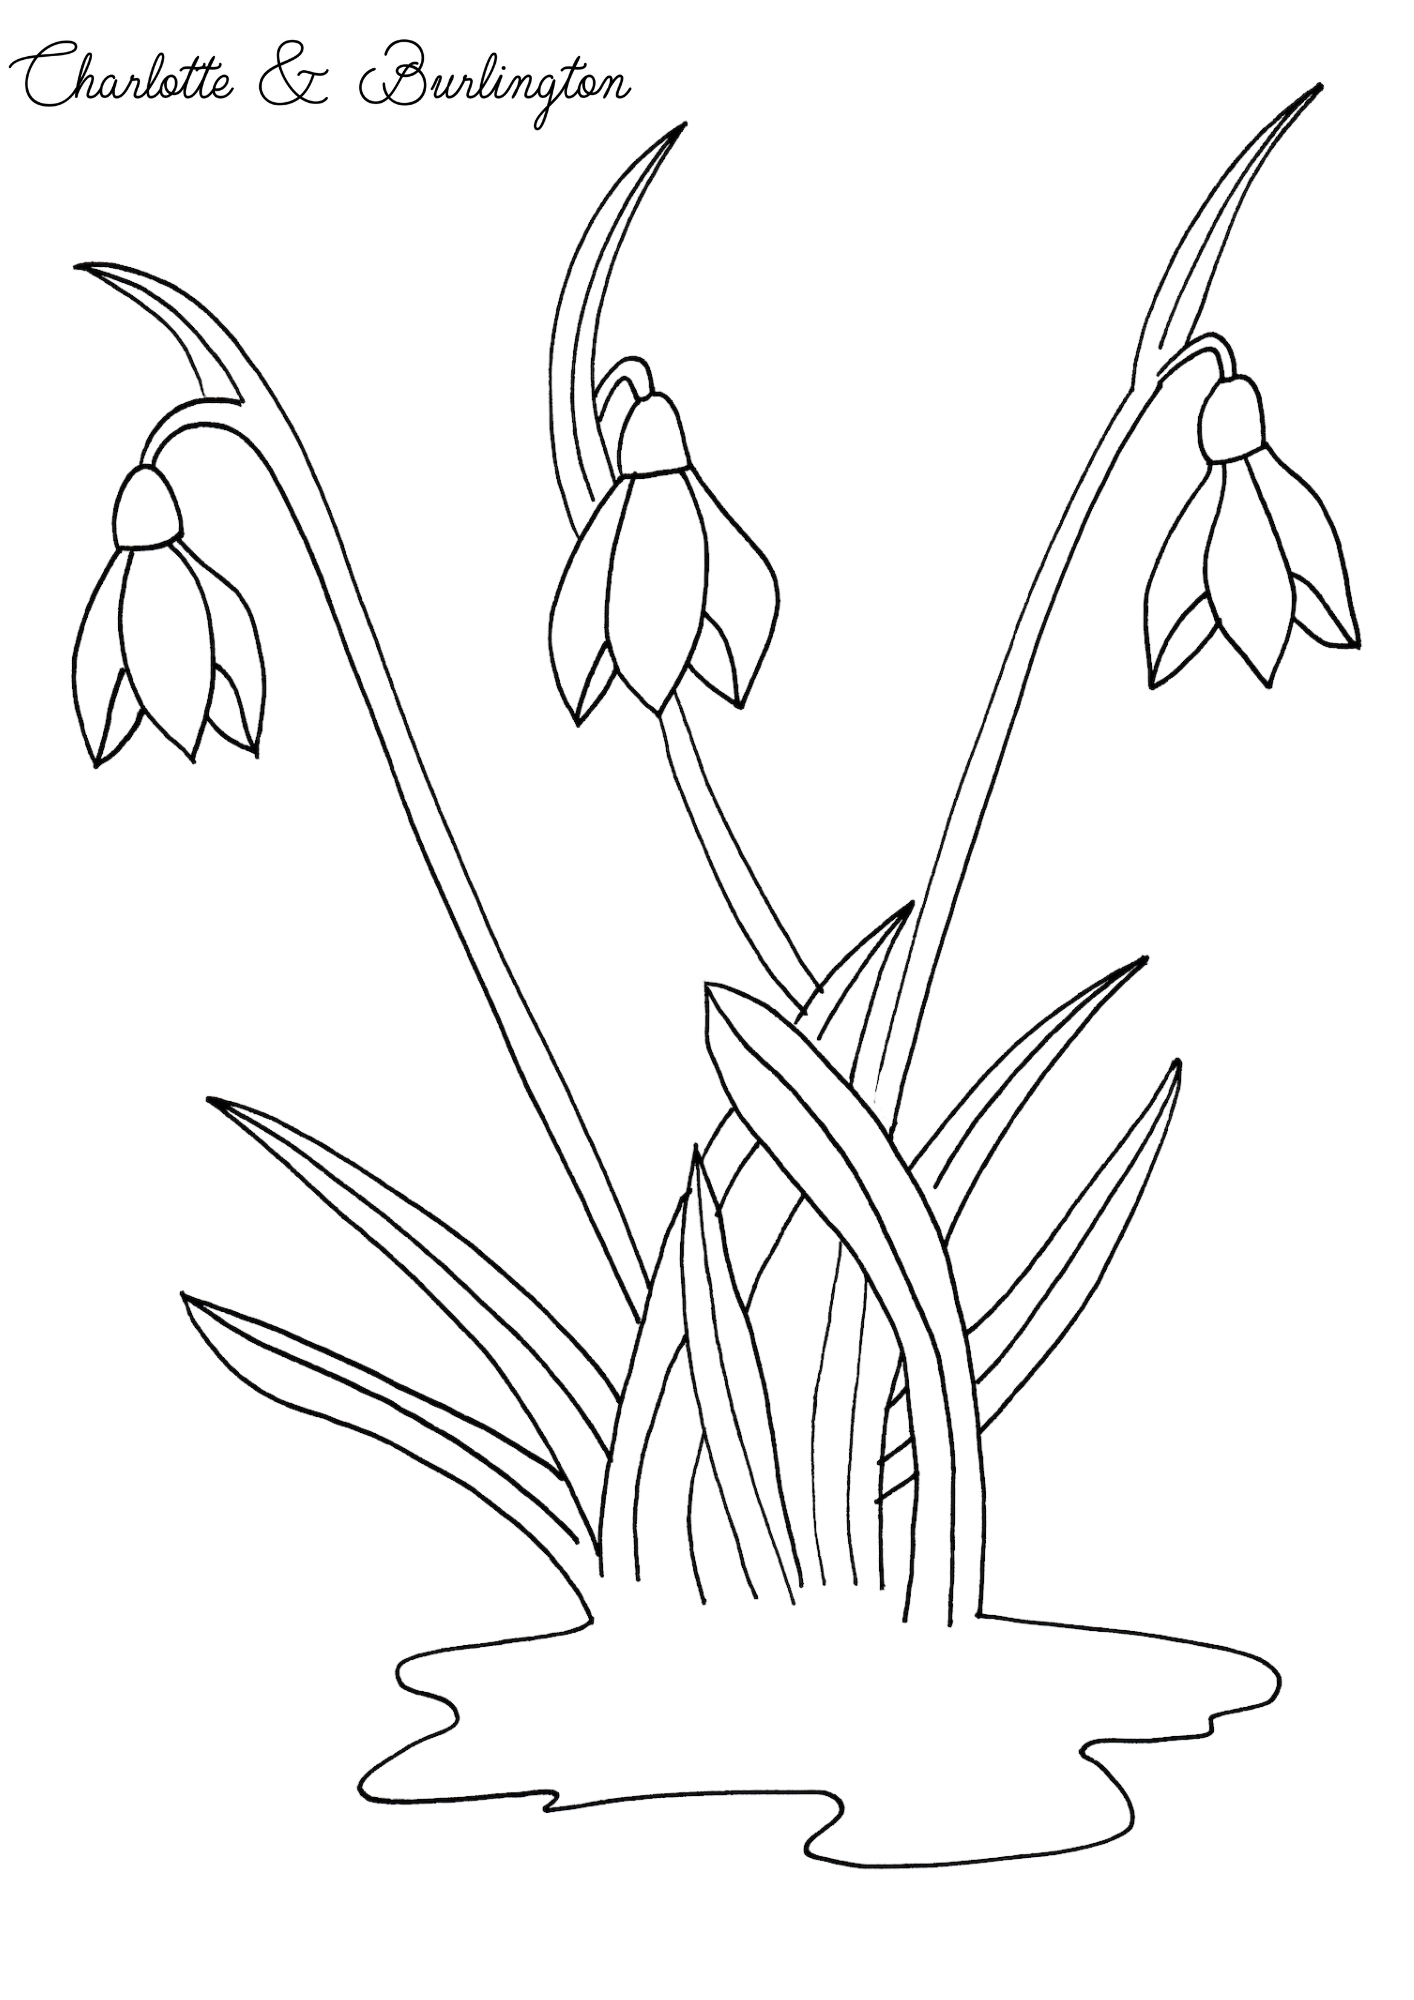 Fun facts about flowers for children - Snowdrop colouring - Charlotte and Burlington family club